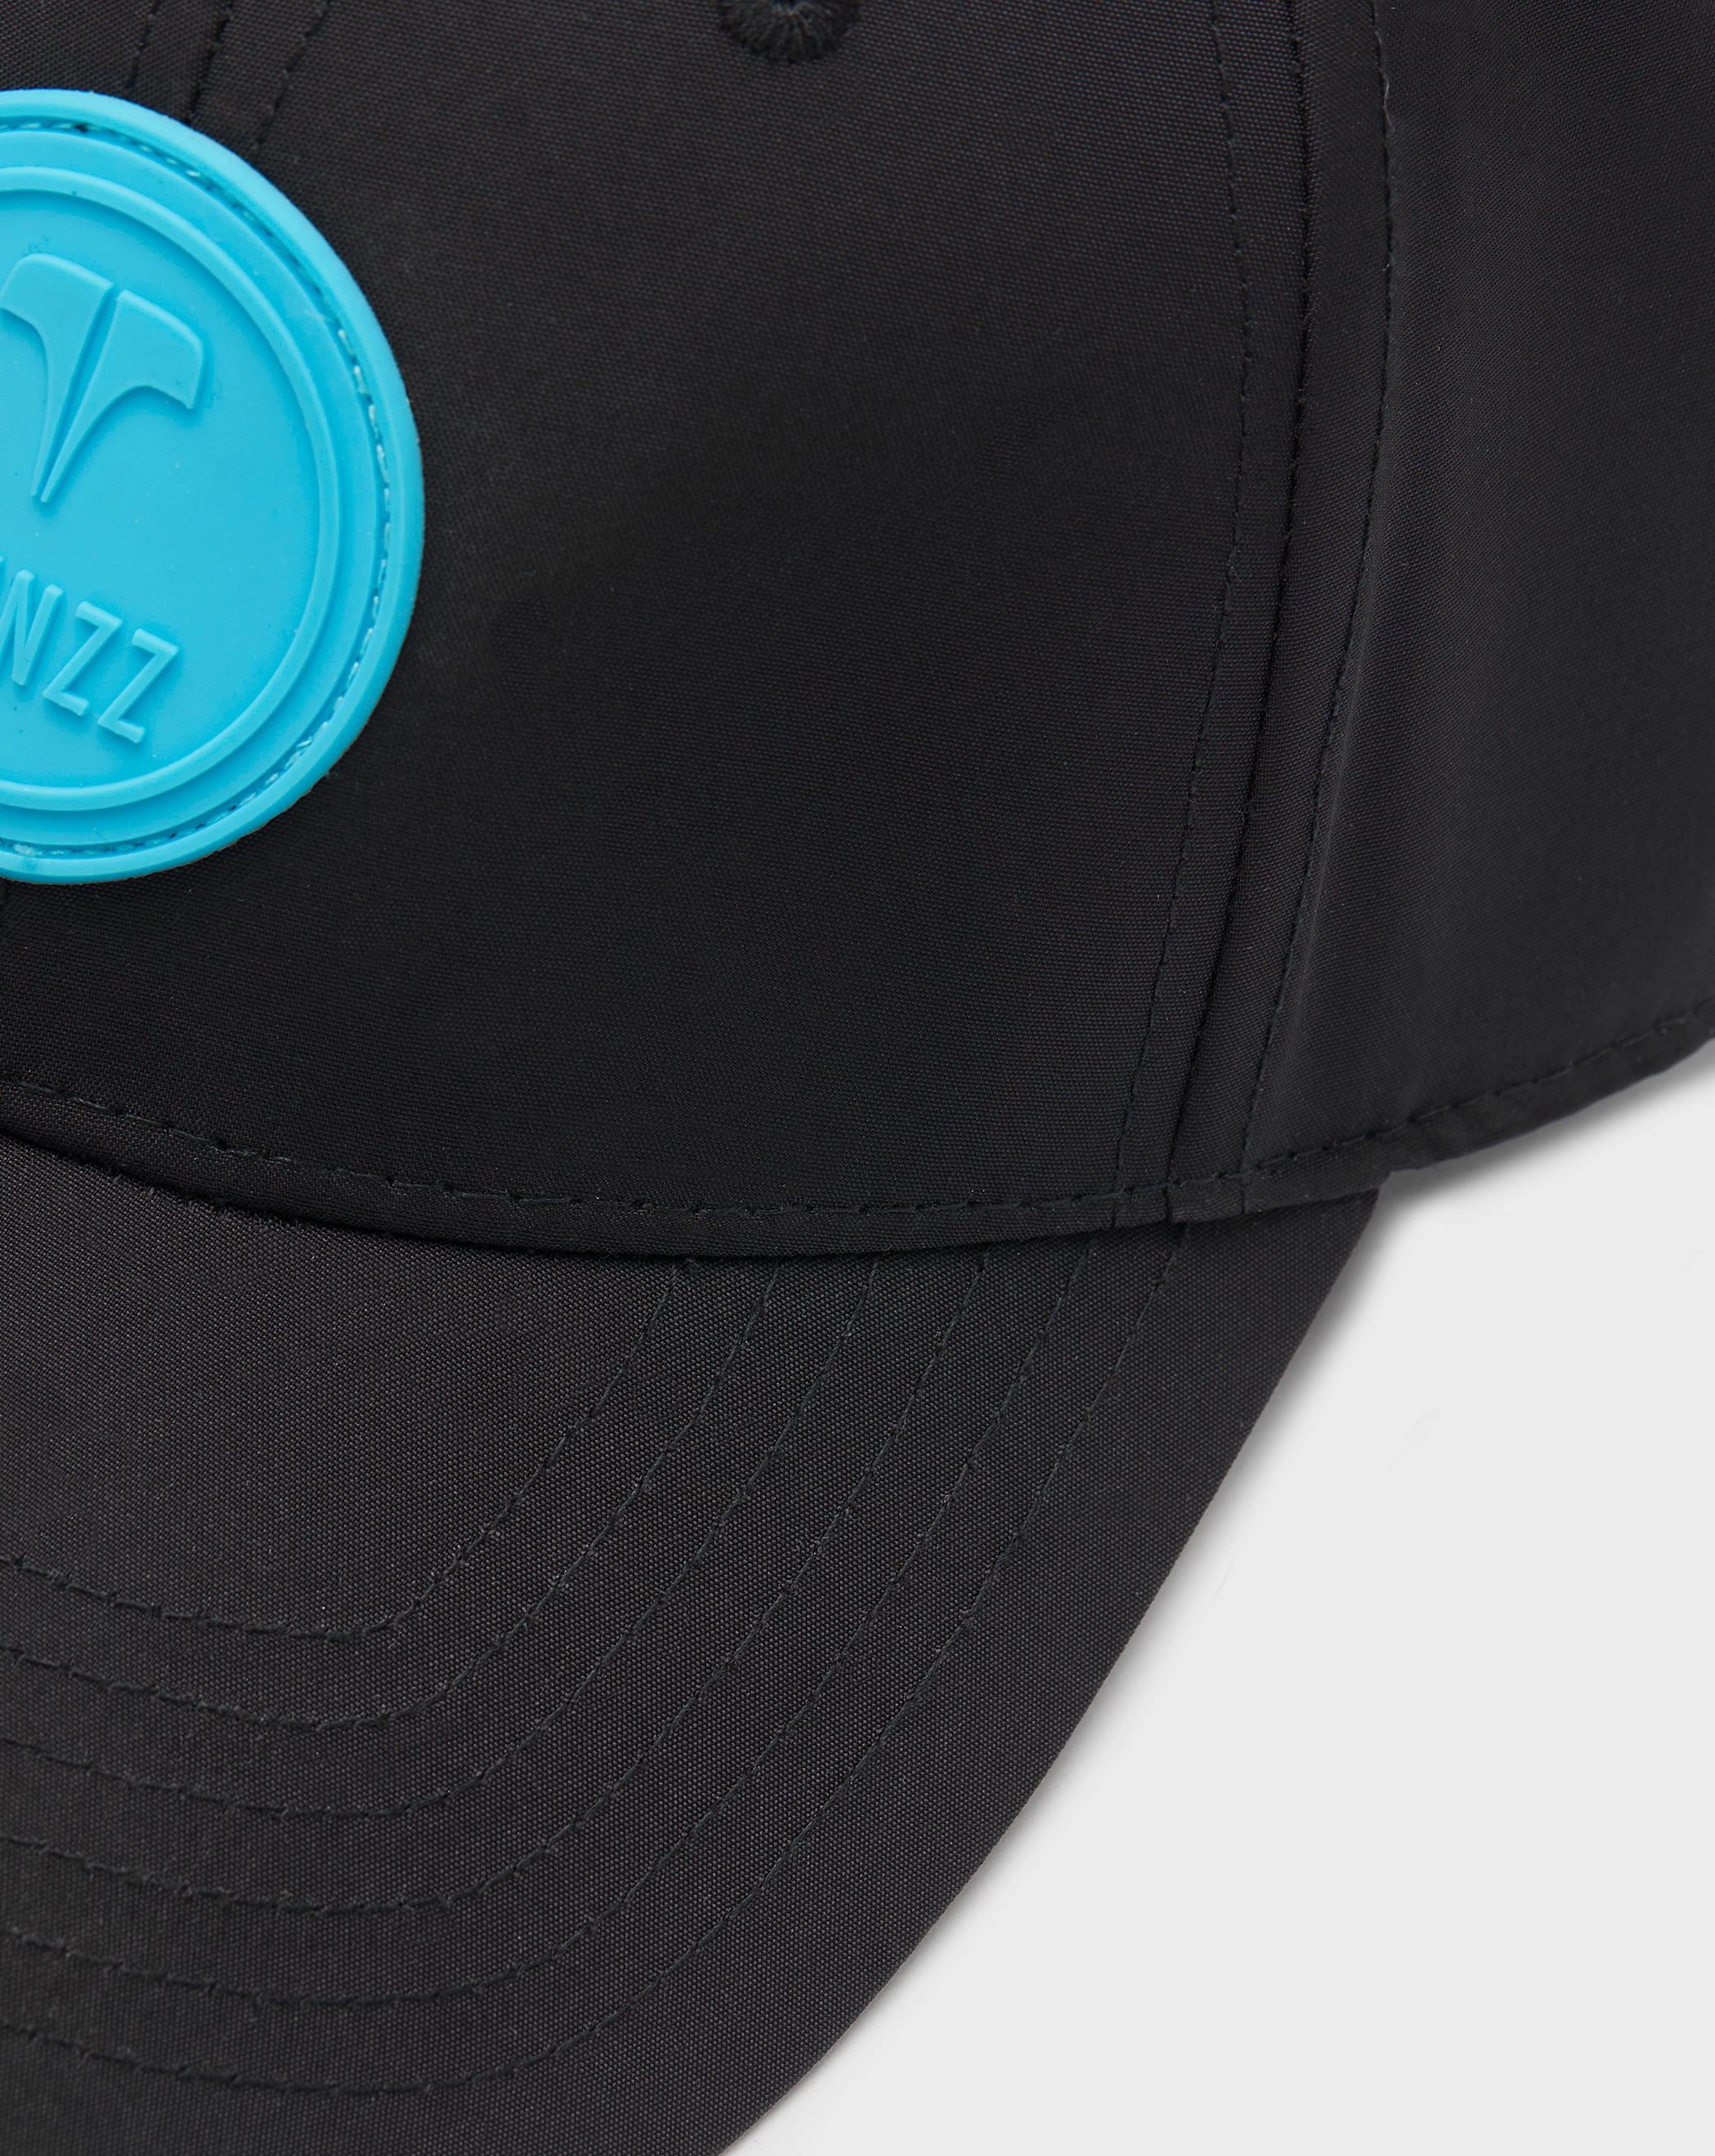 Twinzz black pitcher cap with baby blue rubber logo